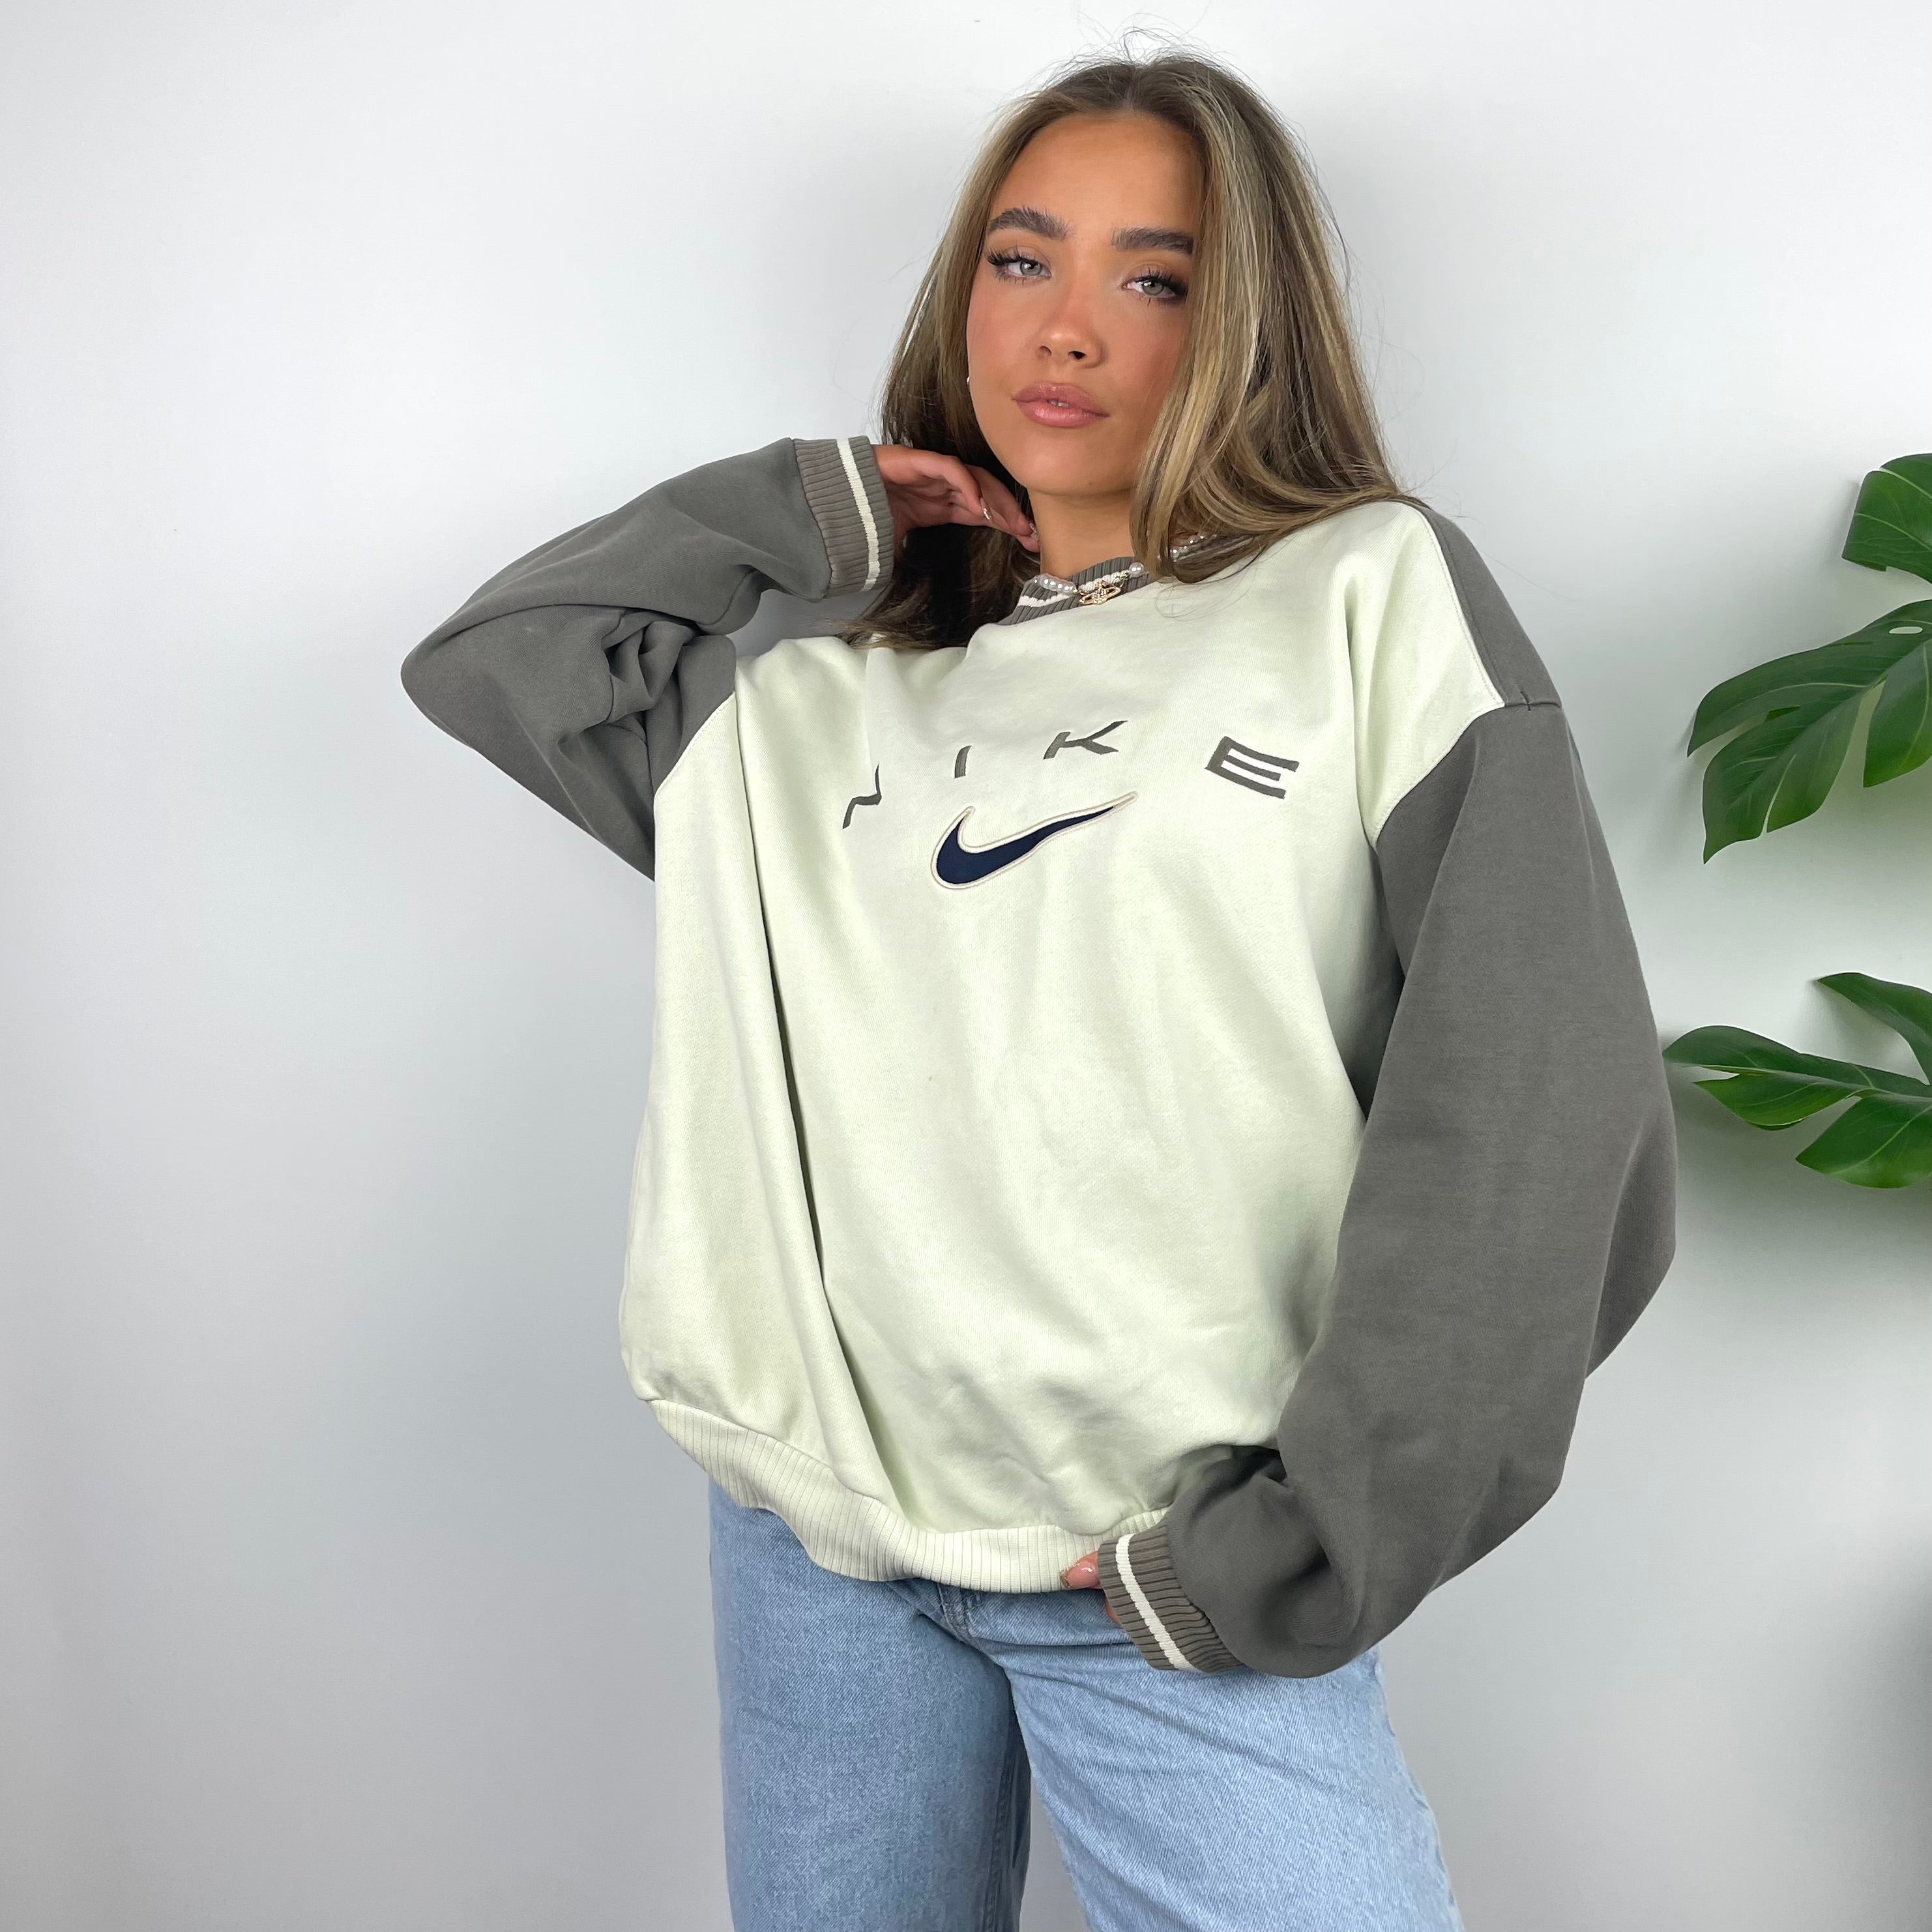 Nike Cream & Brown Embroidered Spell Out Sweatshirt (XL)